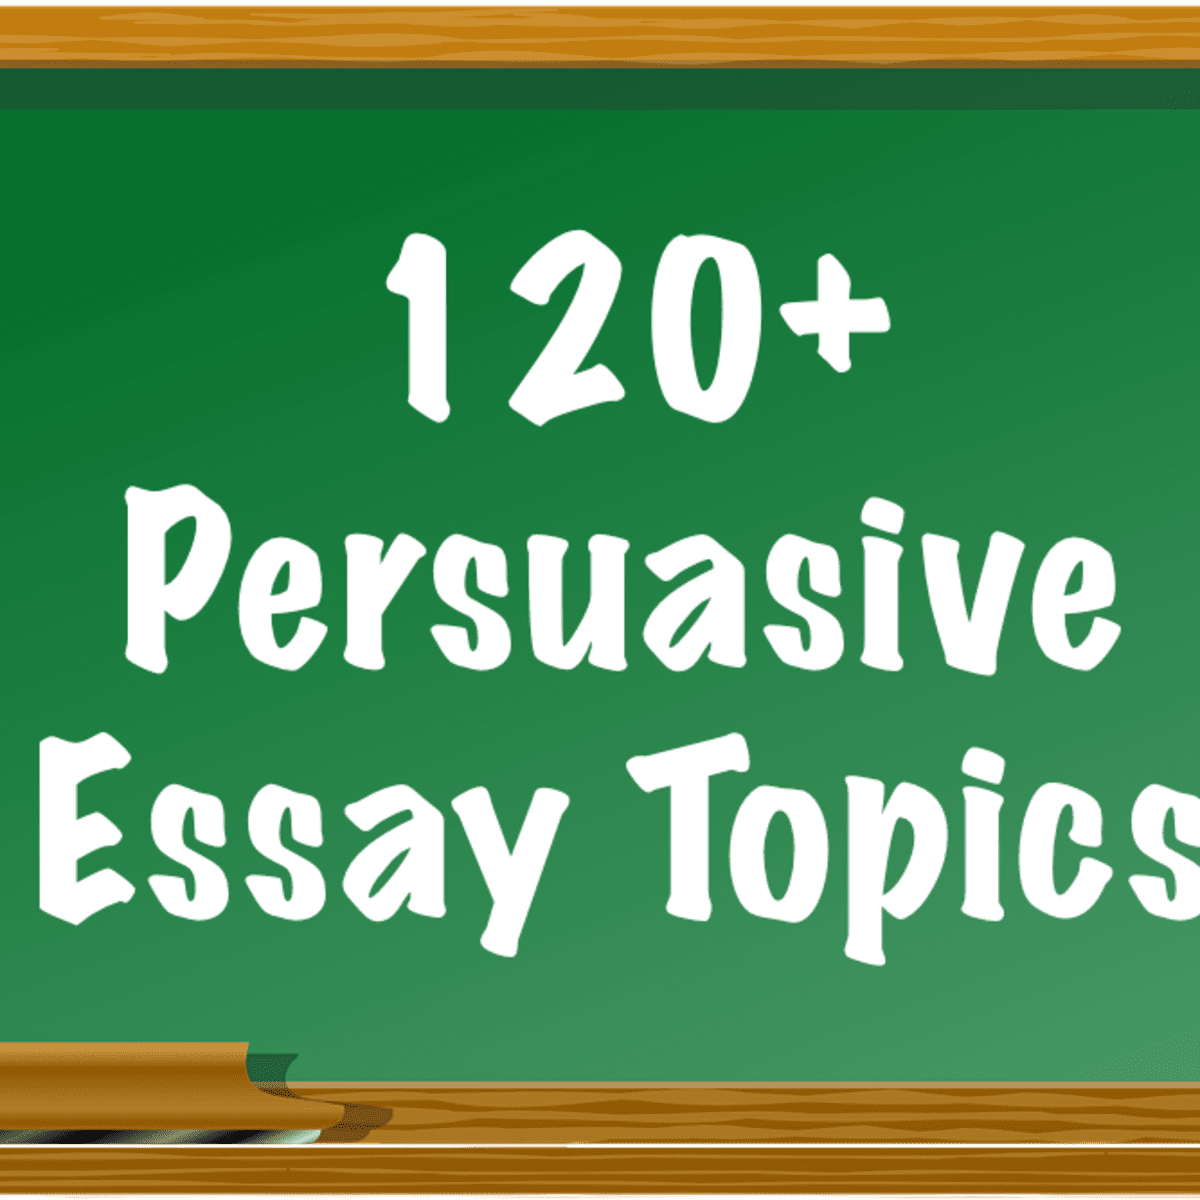 persuasive essay topics for middle school students